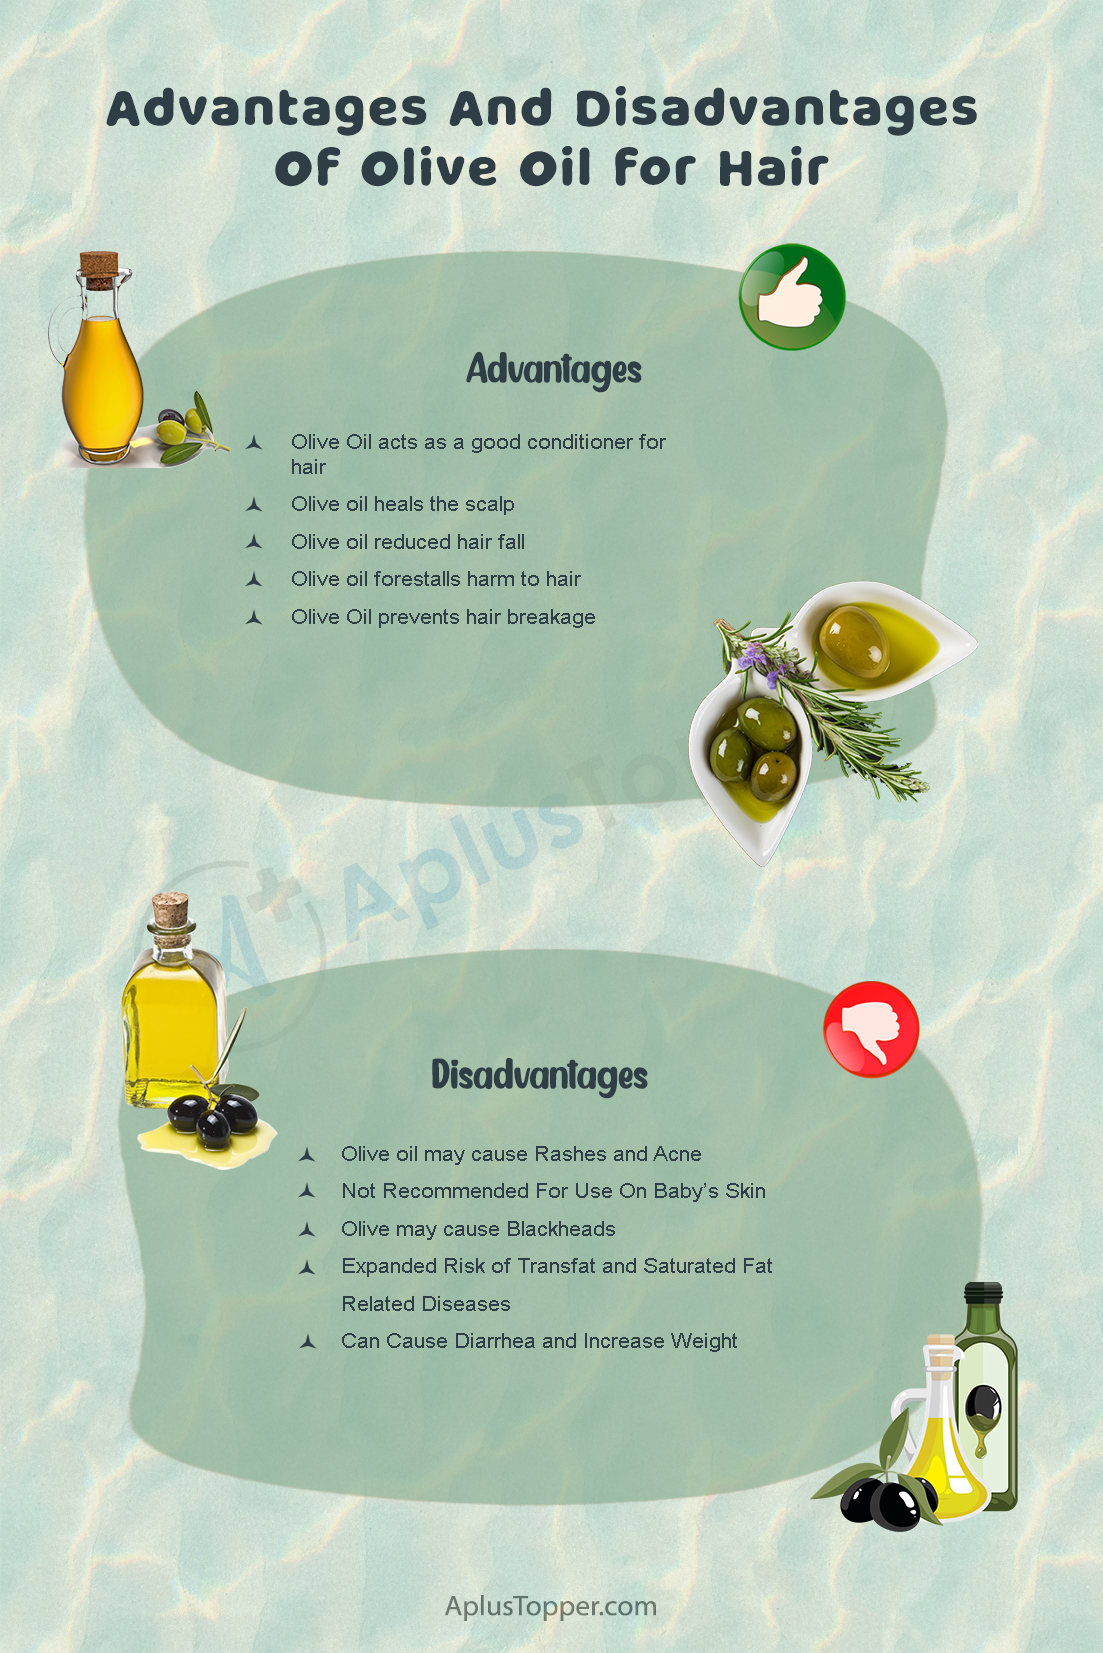 Advantages and Disadvantages of Olive Oil 2